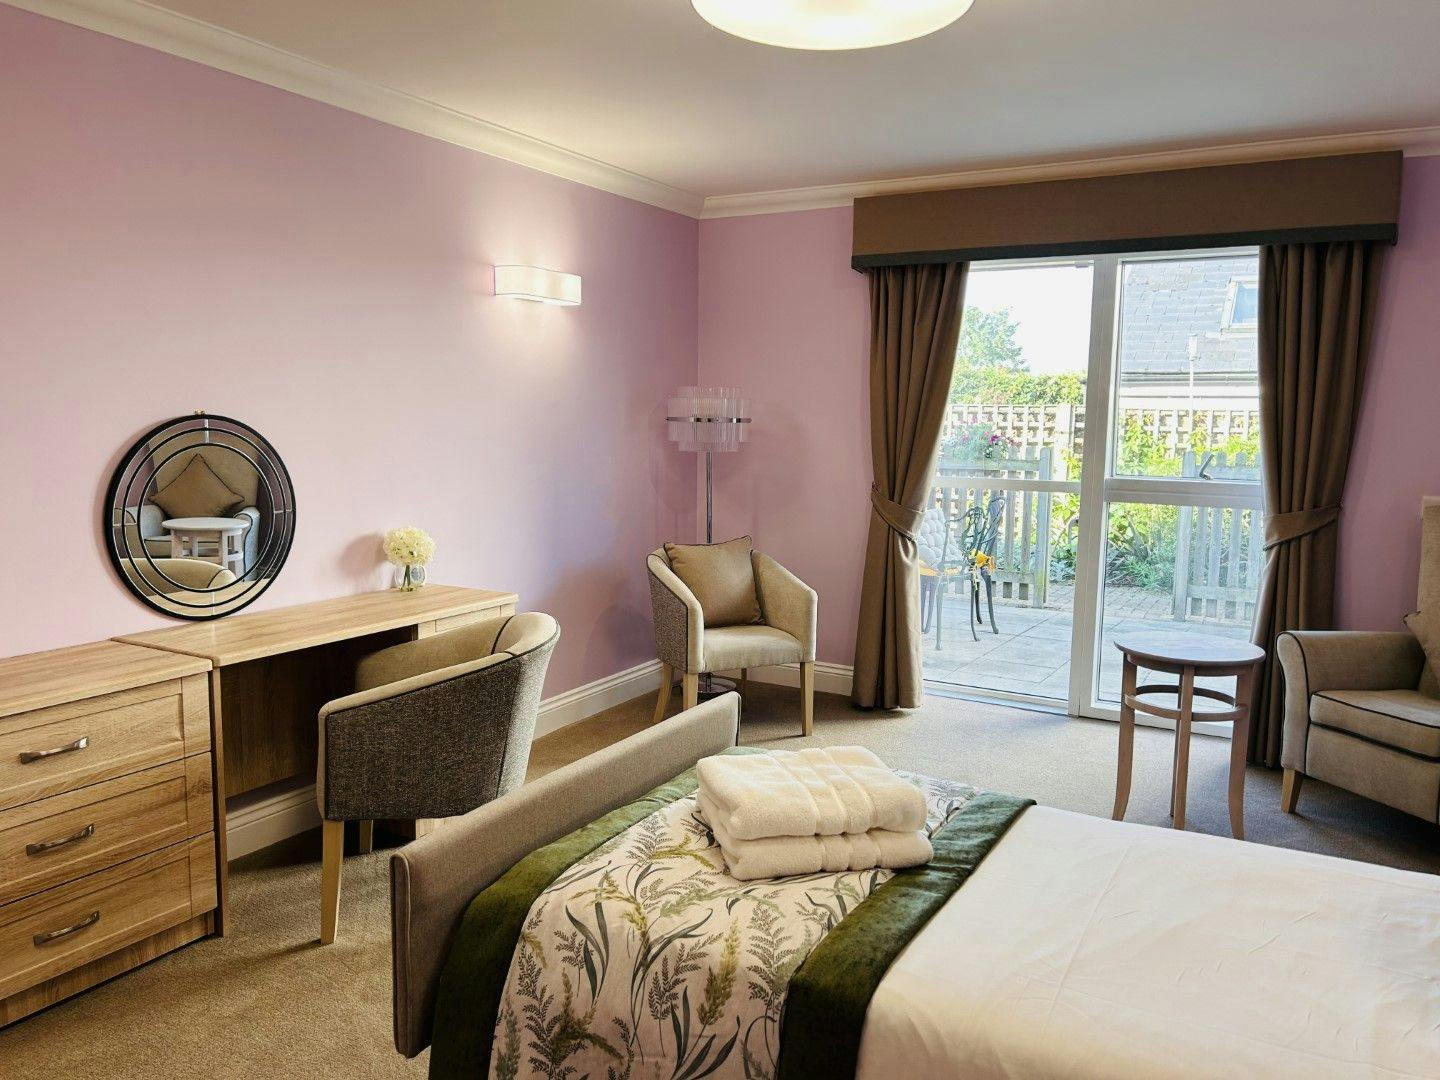 Bedroom at Kew House Care Home in Kingston upon Thames, Greater London 